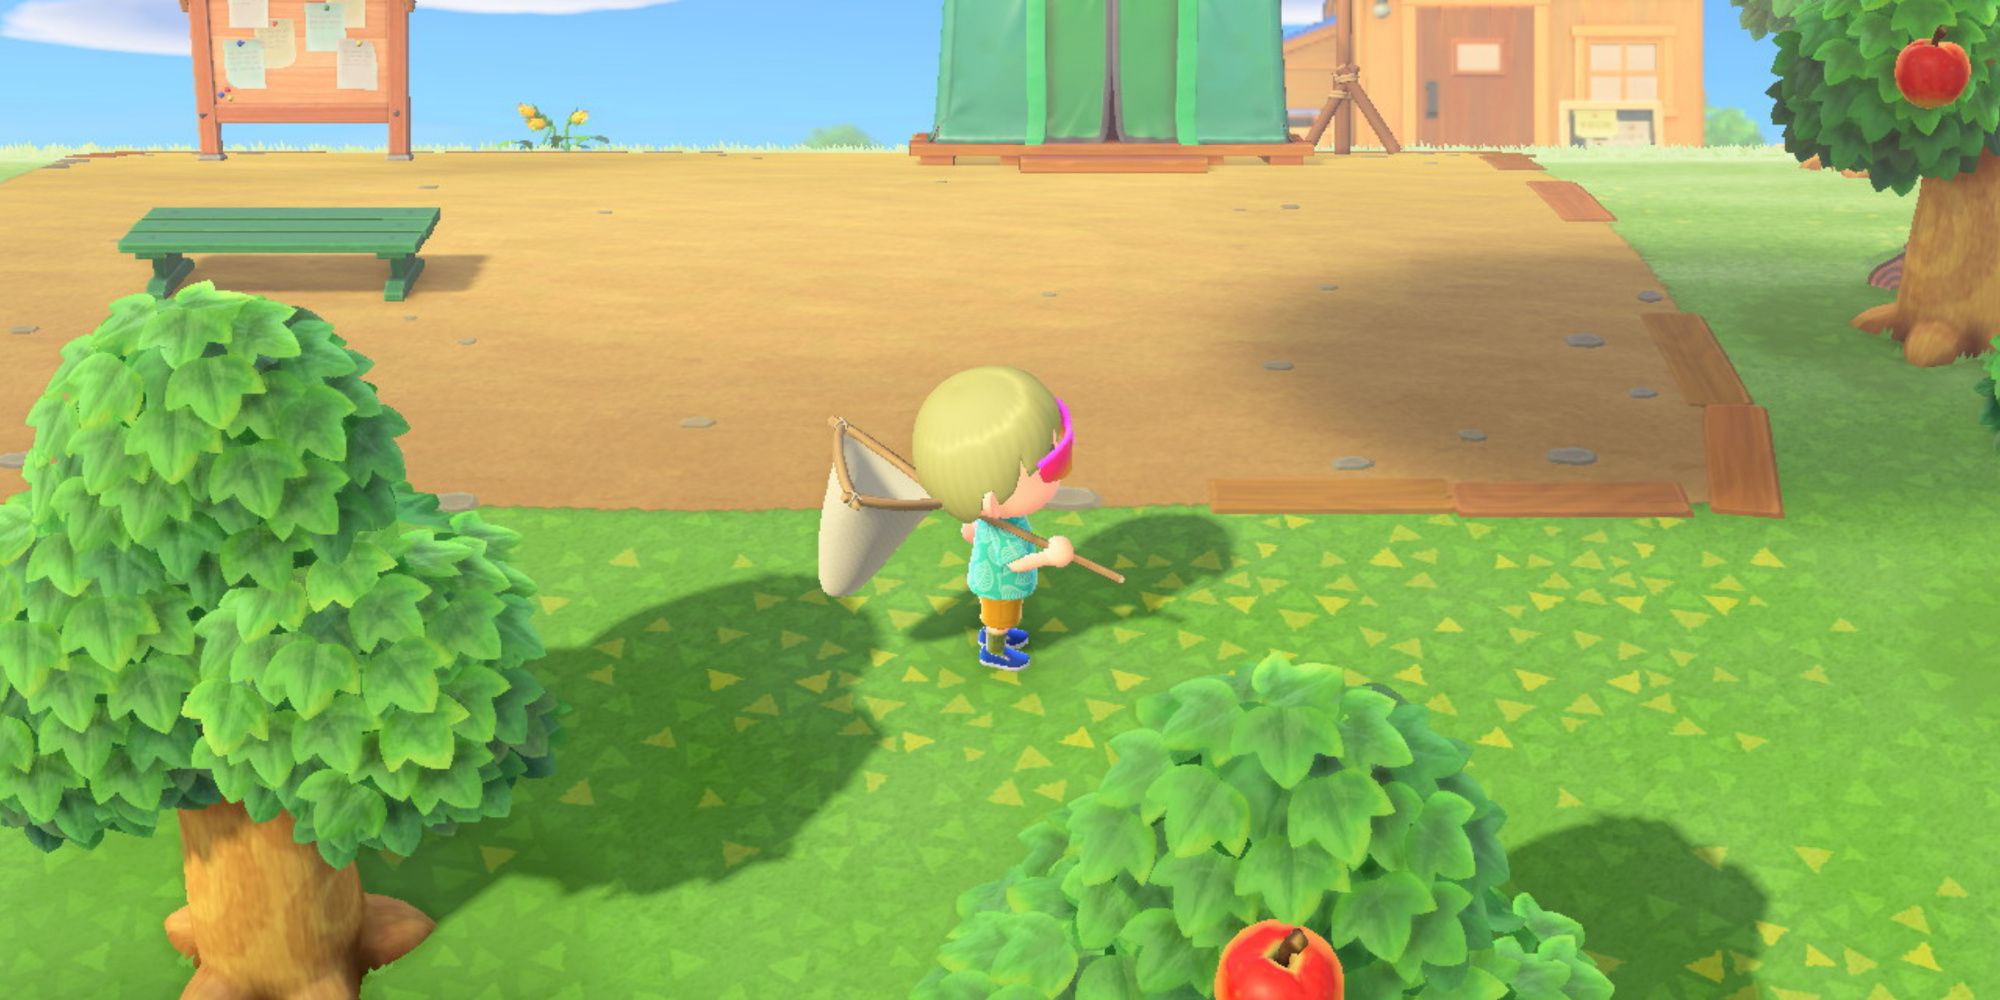 Exploring the world in Animal Crossing New Horizons